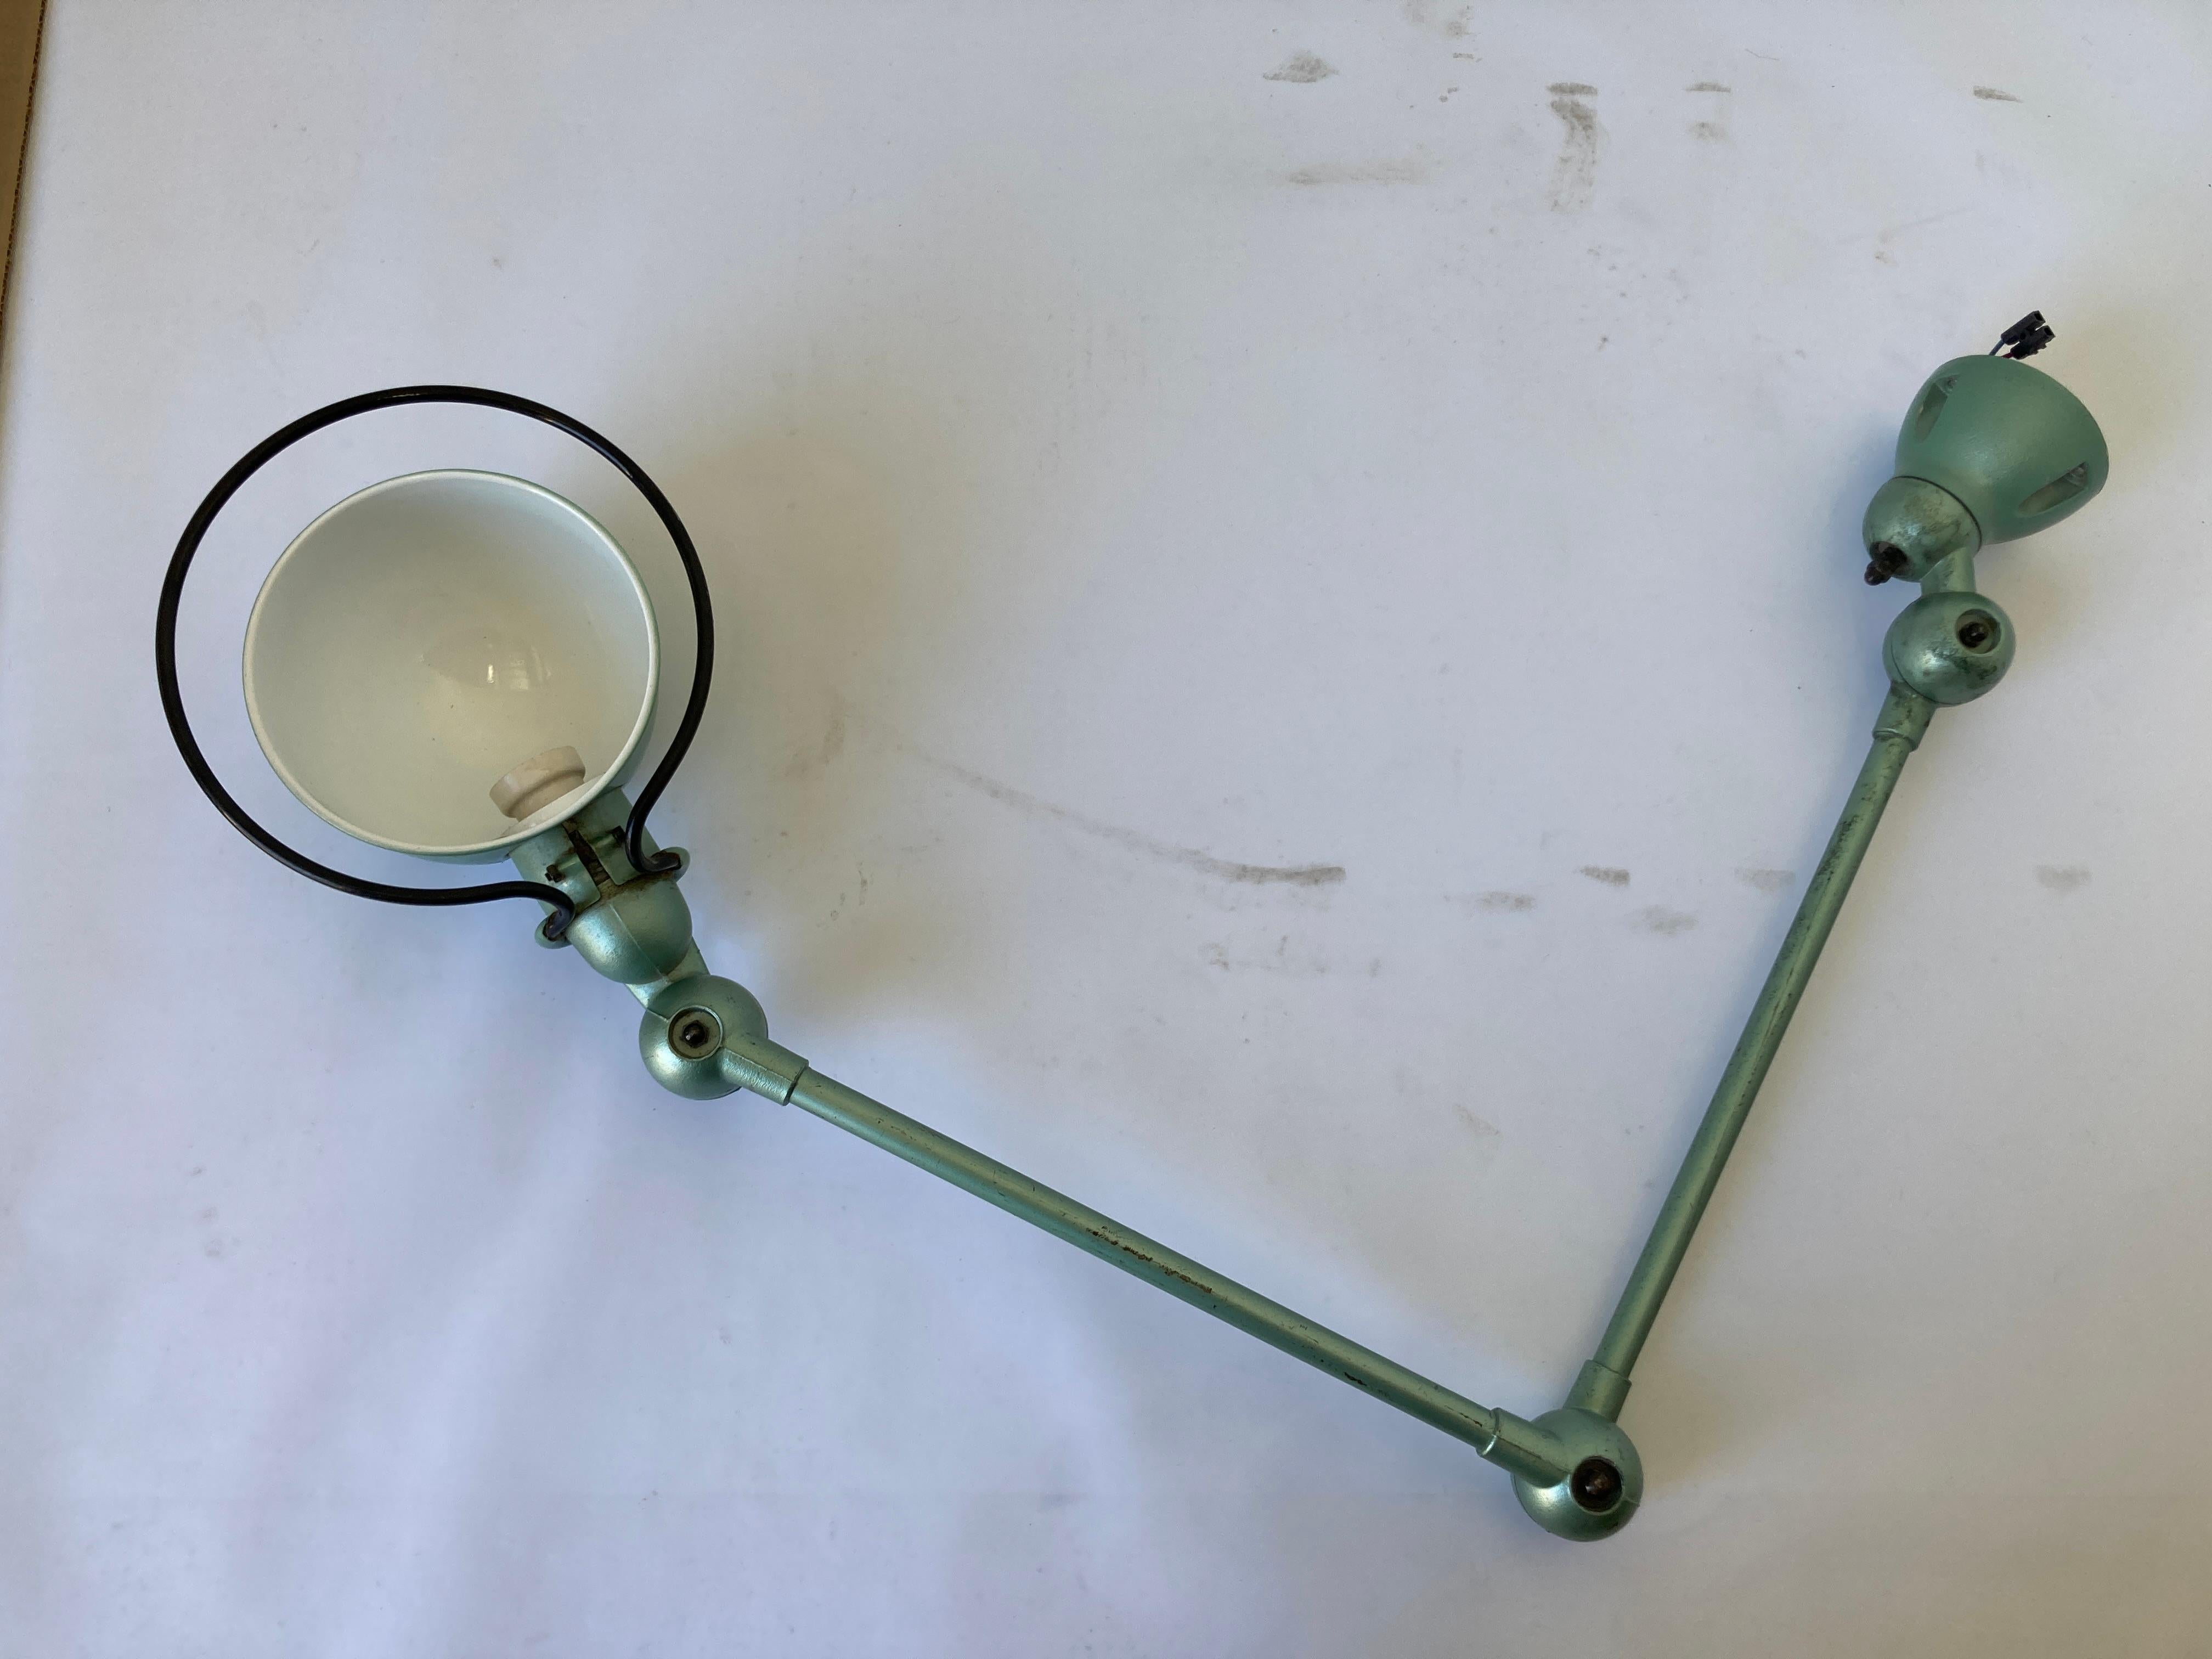 Vintage Jielde factory lamp from France, made in Lyon.
French Industrial Metal Lamp by Jean-Louis Domecq for Jielde Factory.
Circa 1940 -1950.
Original Jielde task lamps with clamp holders.
Adjustable at all joints, green plate edition, switch on